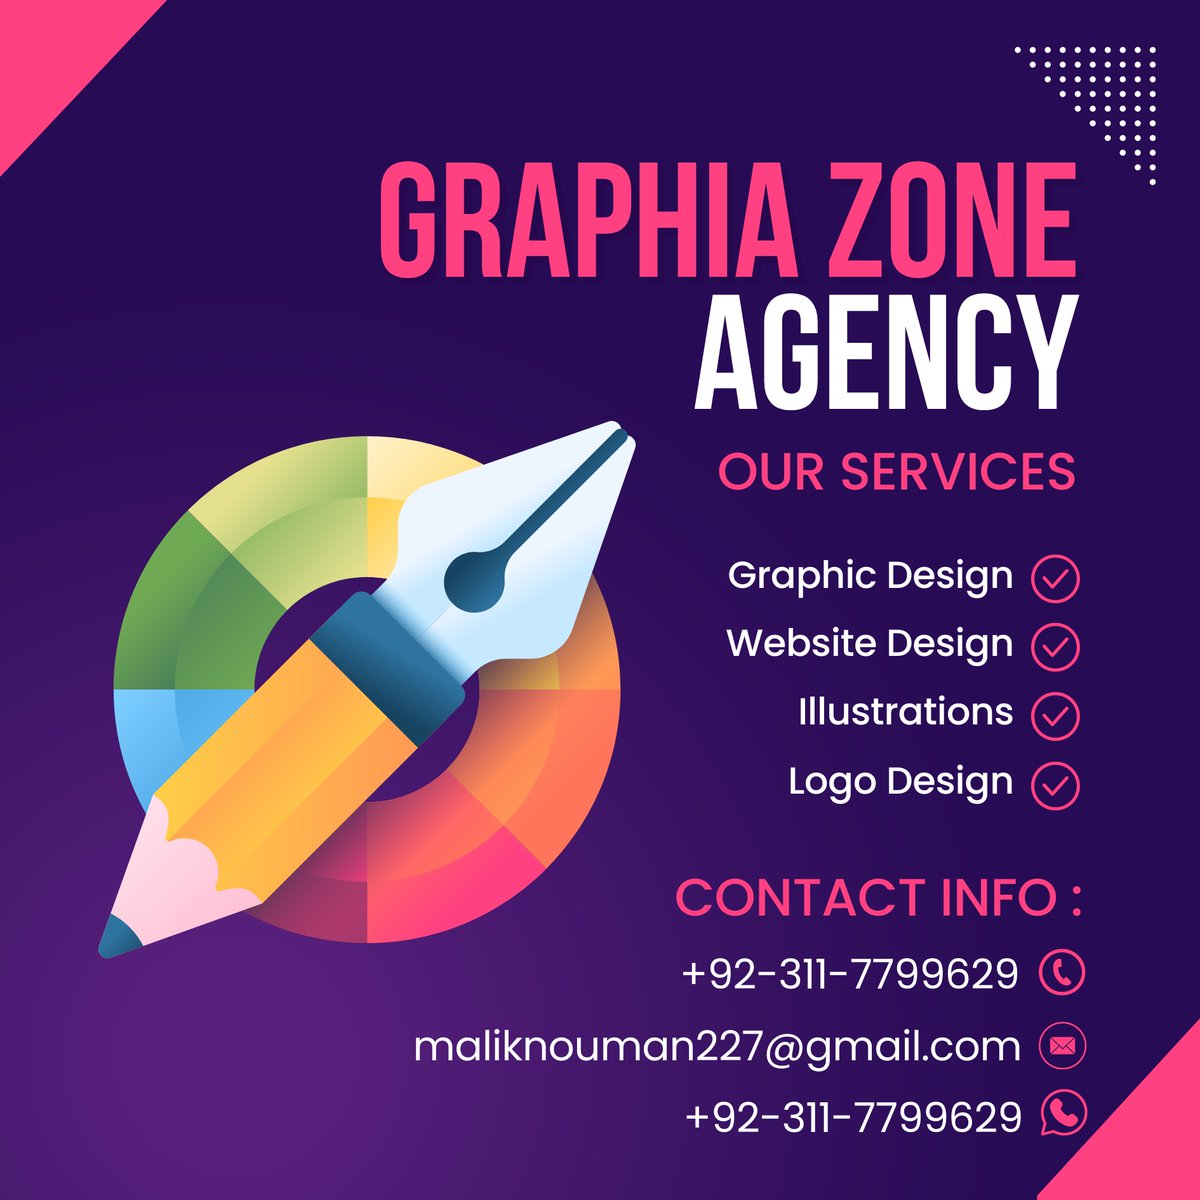 'Elevate Your Brand's Visual Identity with Our Graphic Design Expertise! 🎨 Let's Turn Your Vision into Stunning Reality. #Gabriel #CRYARS #MasonGreenwood #KarenCarney #Mario #Mikel #CurrysSamsungGalaxy #Gabi #Zinchenko #Kiwior #Doku #Trossard #LucyLetby #MondayNightFootball